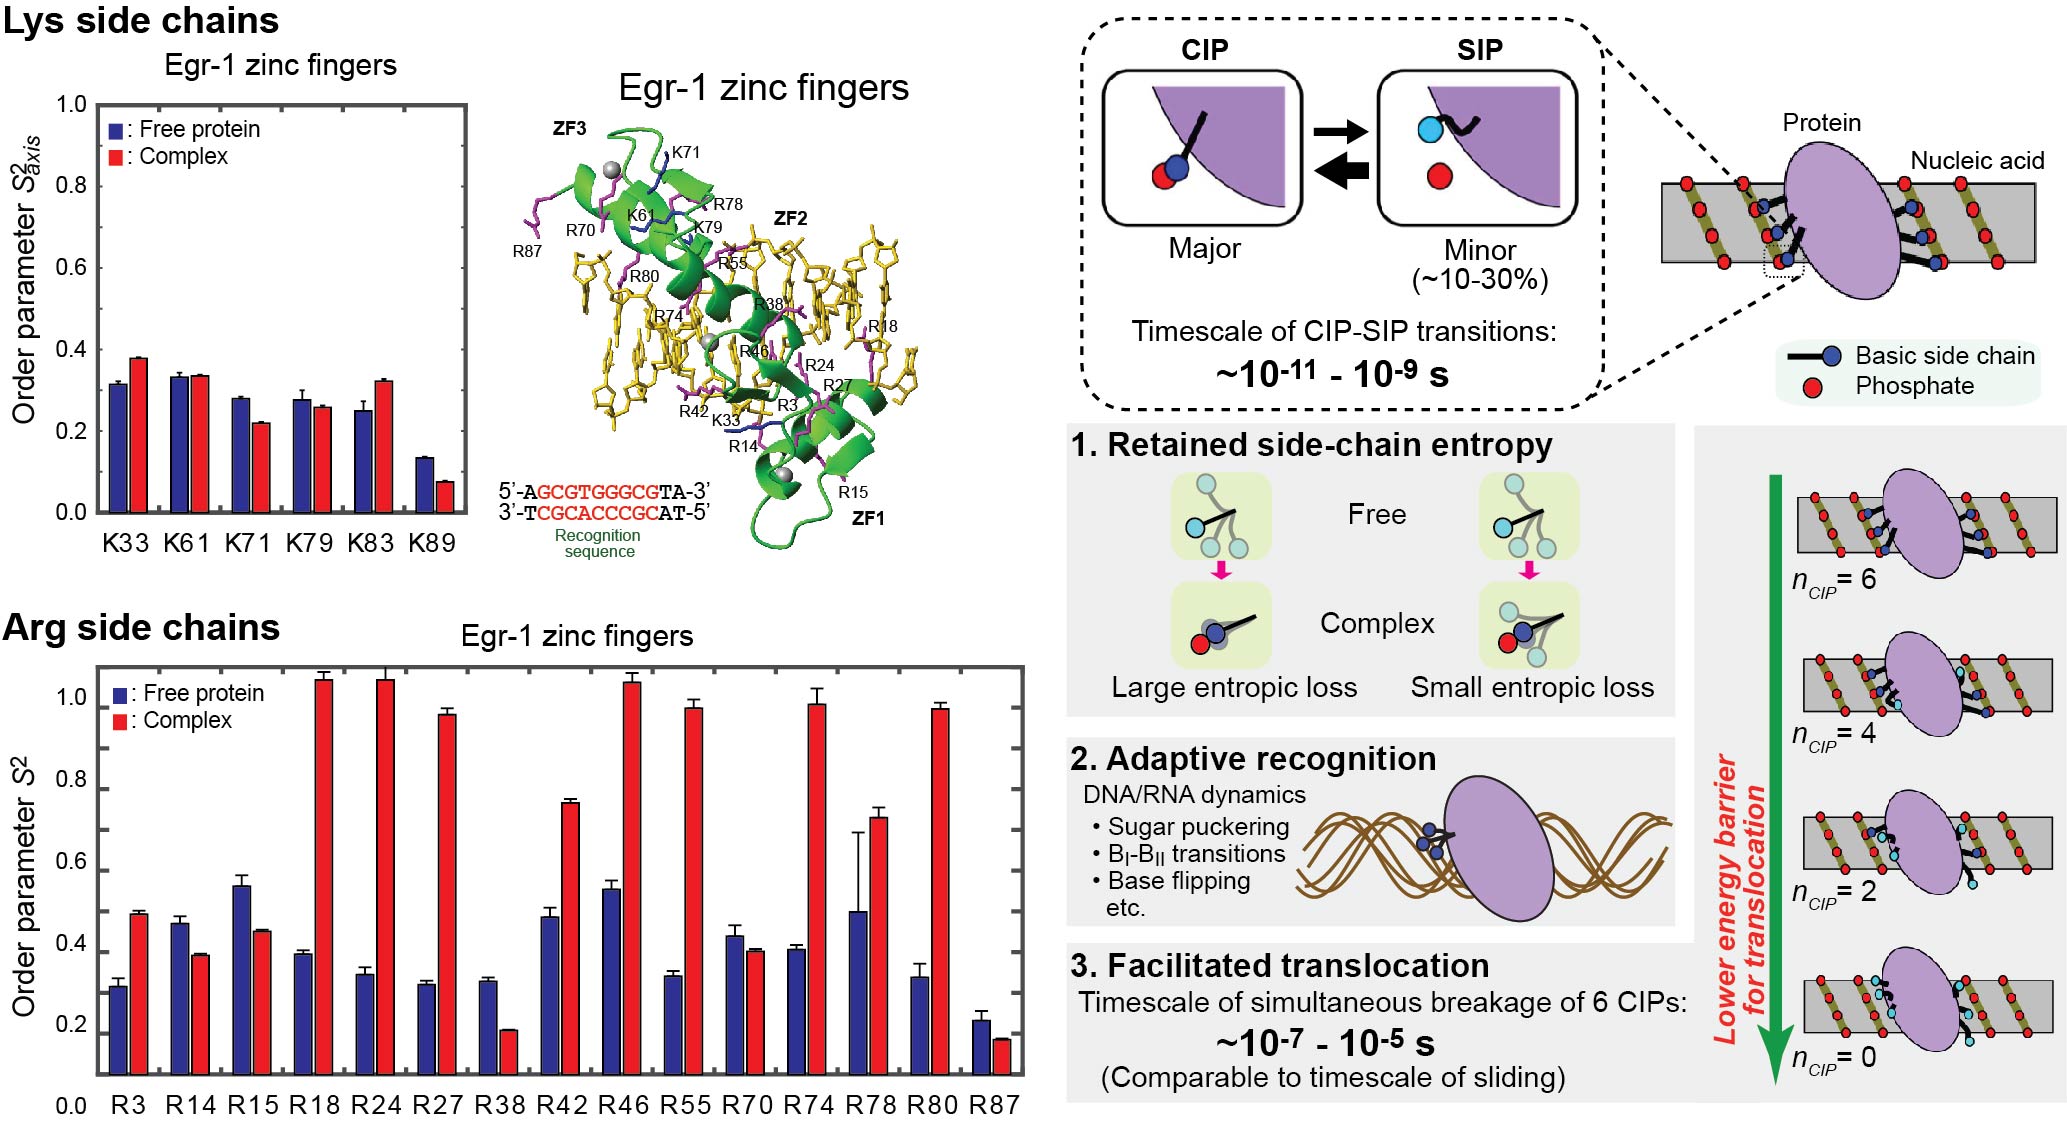 Egr-1 Lys and Arg side-chain ion-pair dynamics